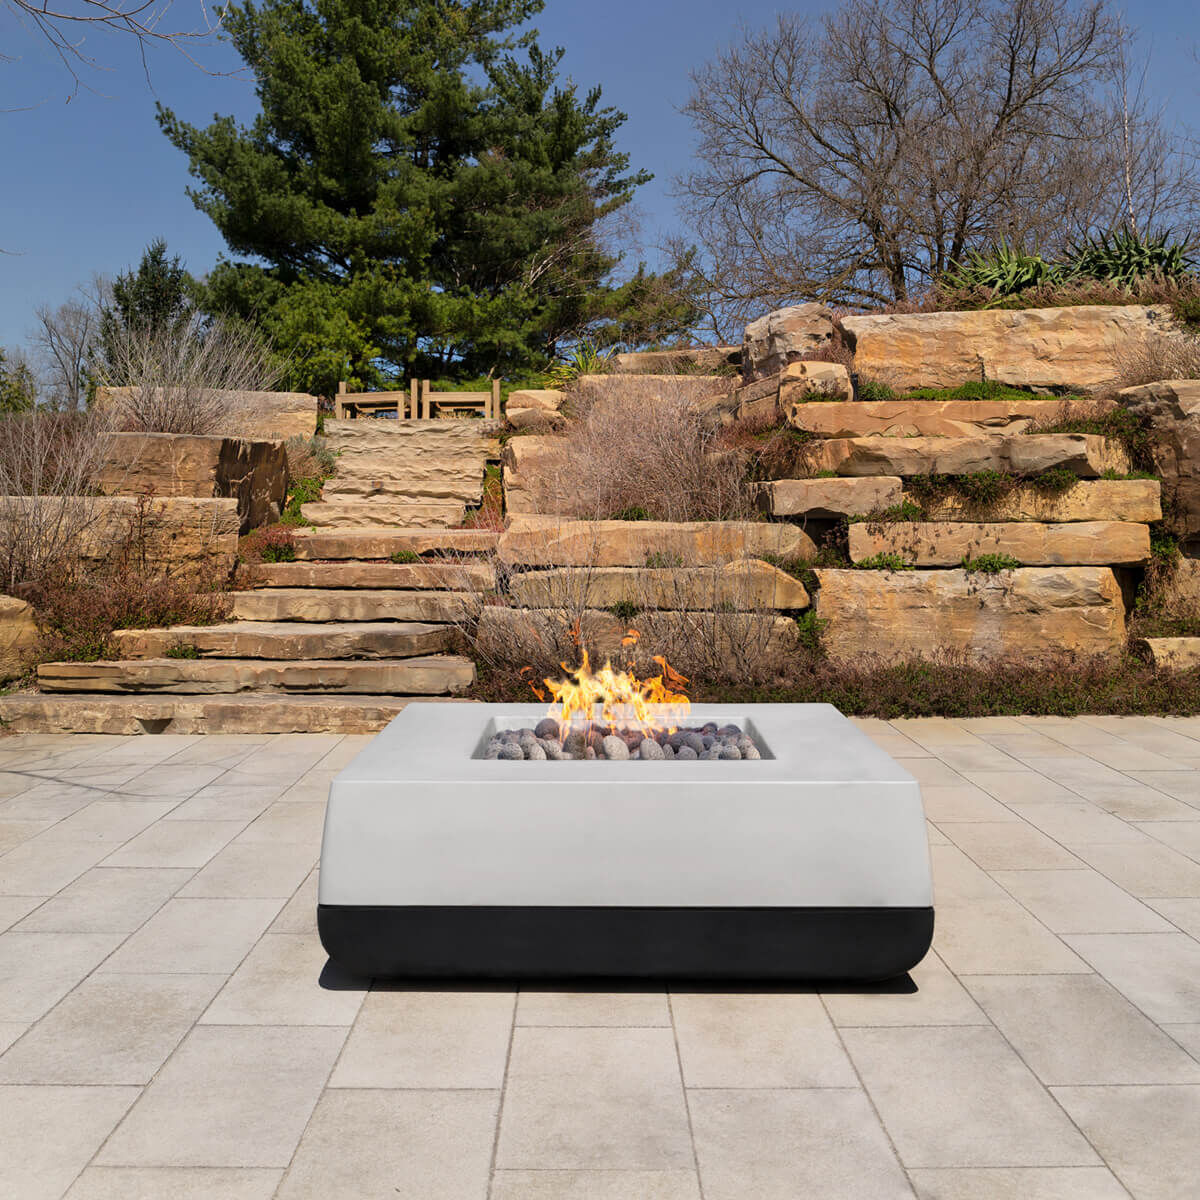 A Quadro outdoor gas fire pit from Flamecraft in carbon and graphite color scheme